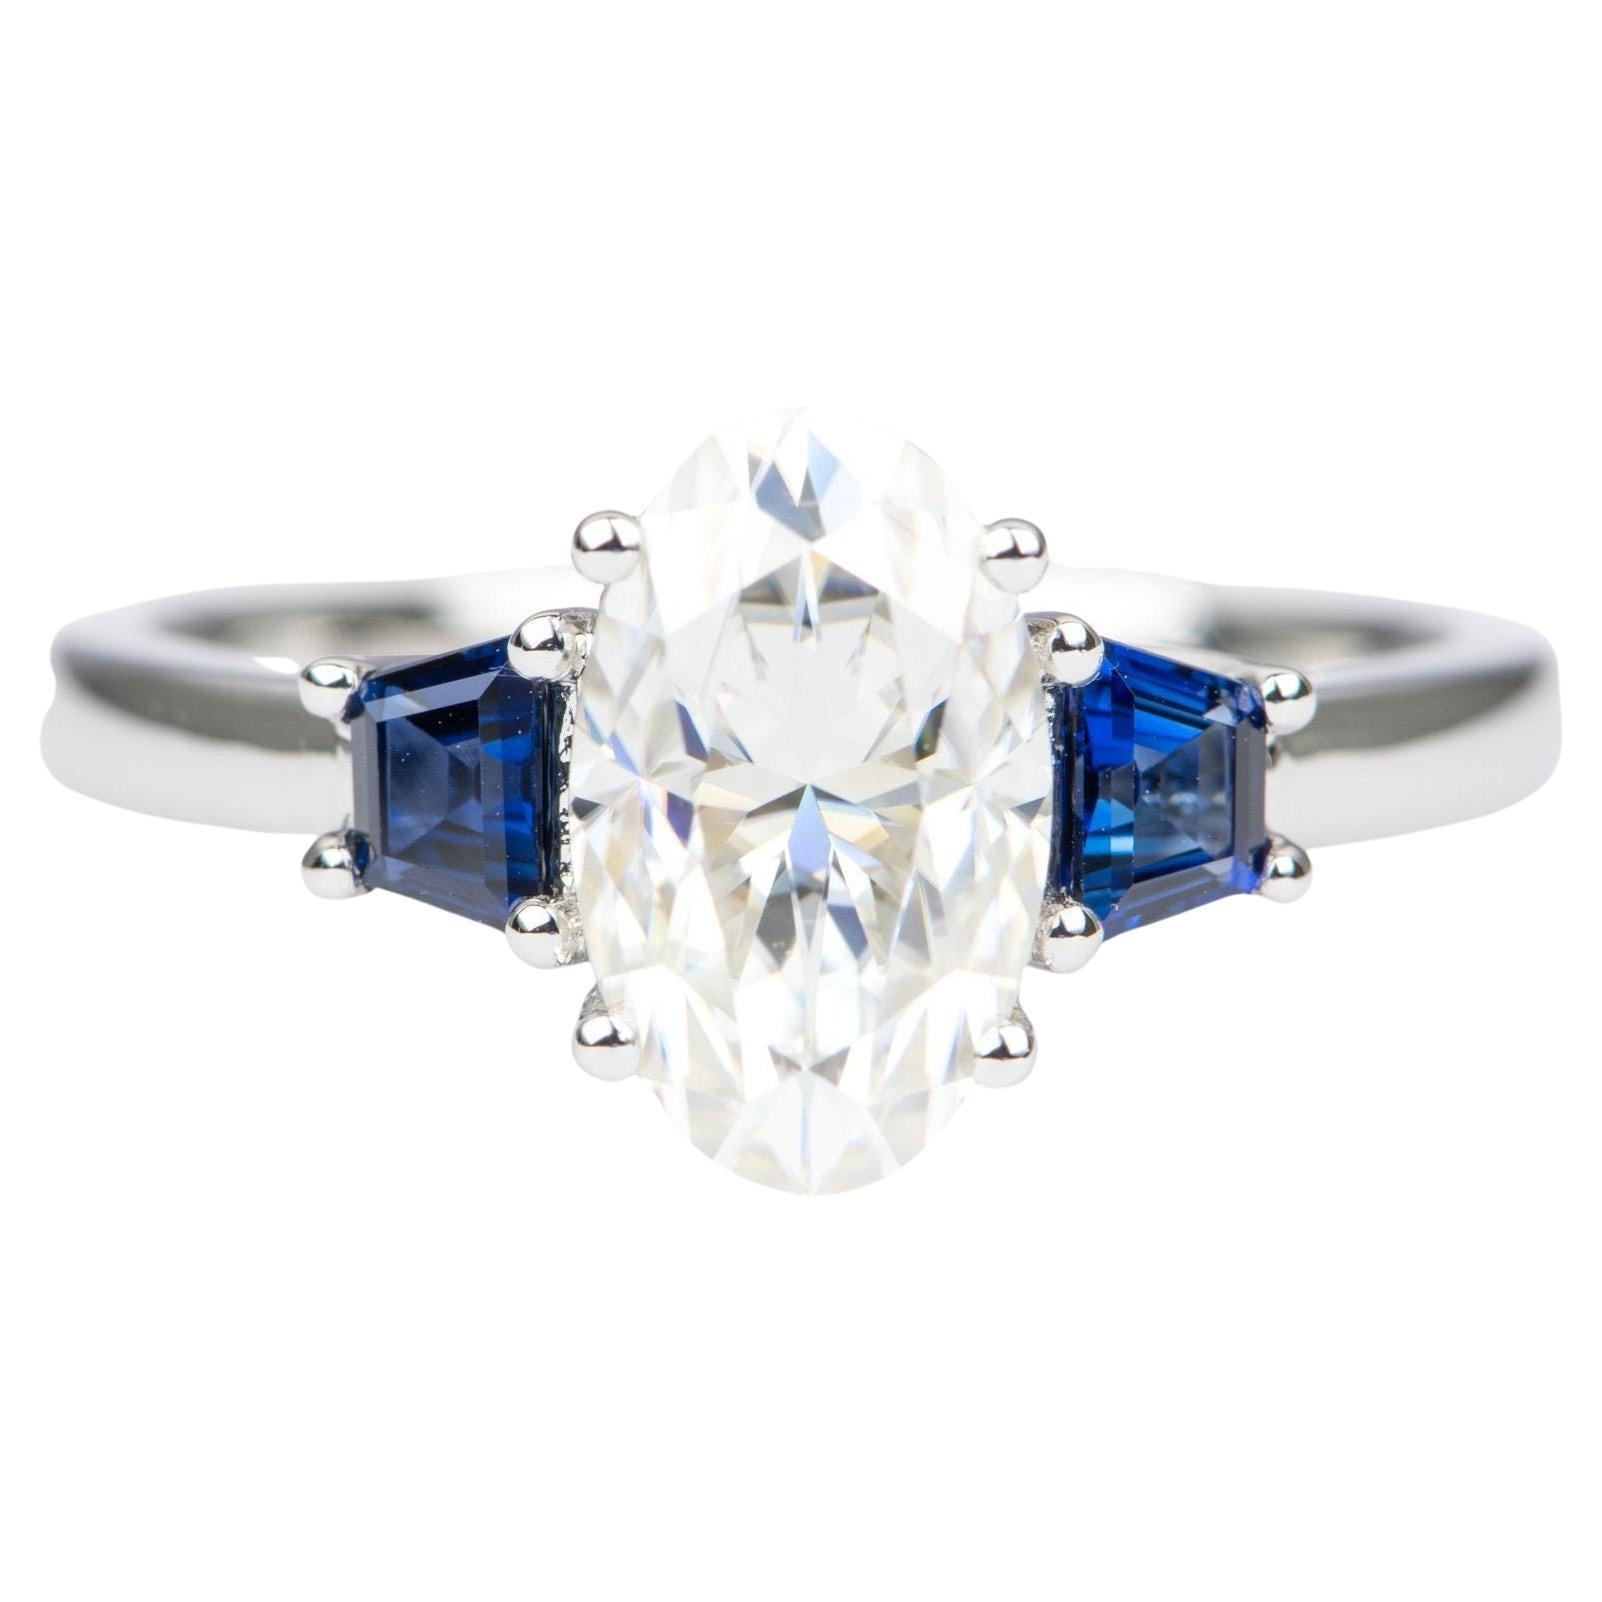 2.23ct Elongated Oval Moissanite Sapphire Sides 14K White Gold Engagement Ring